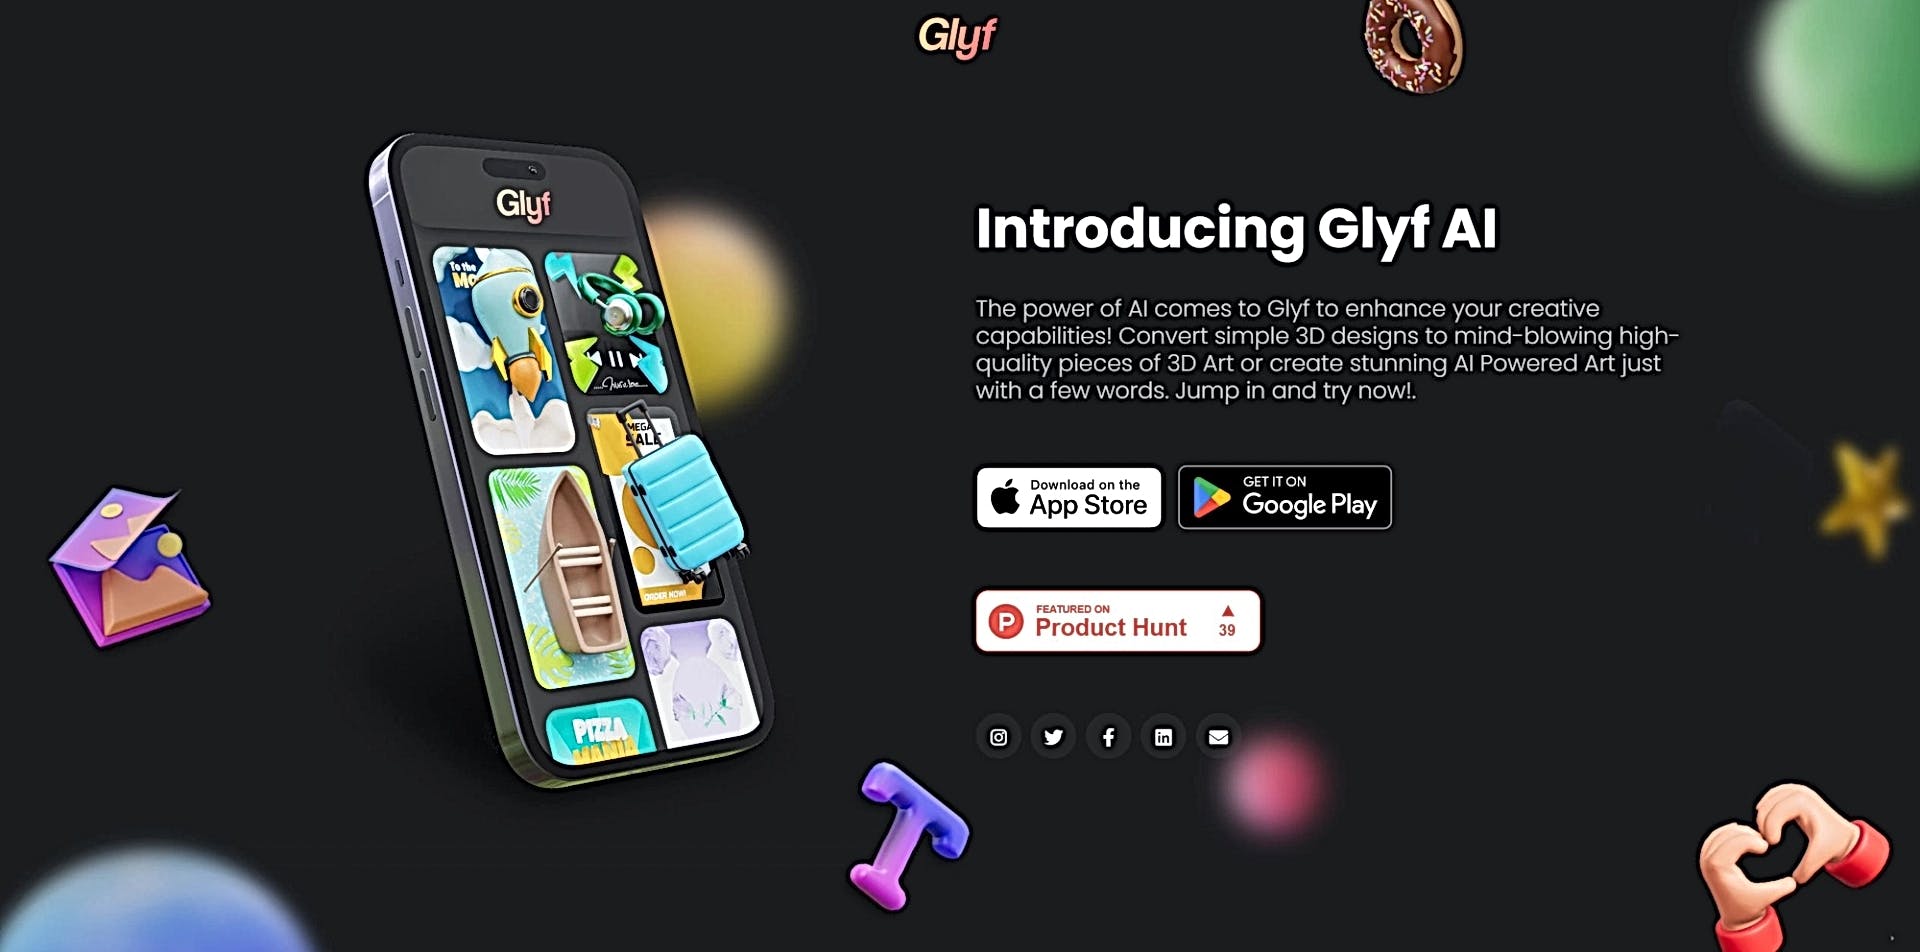 Glyf featured